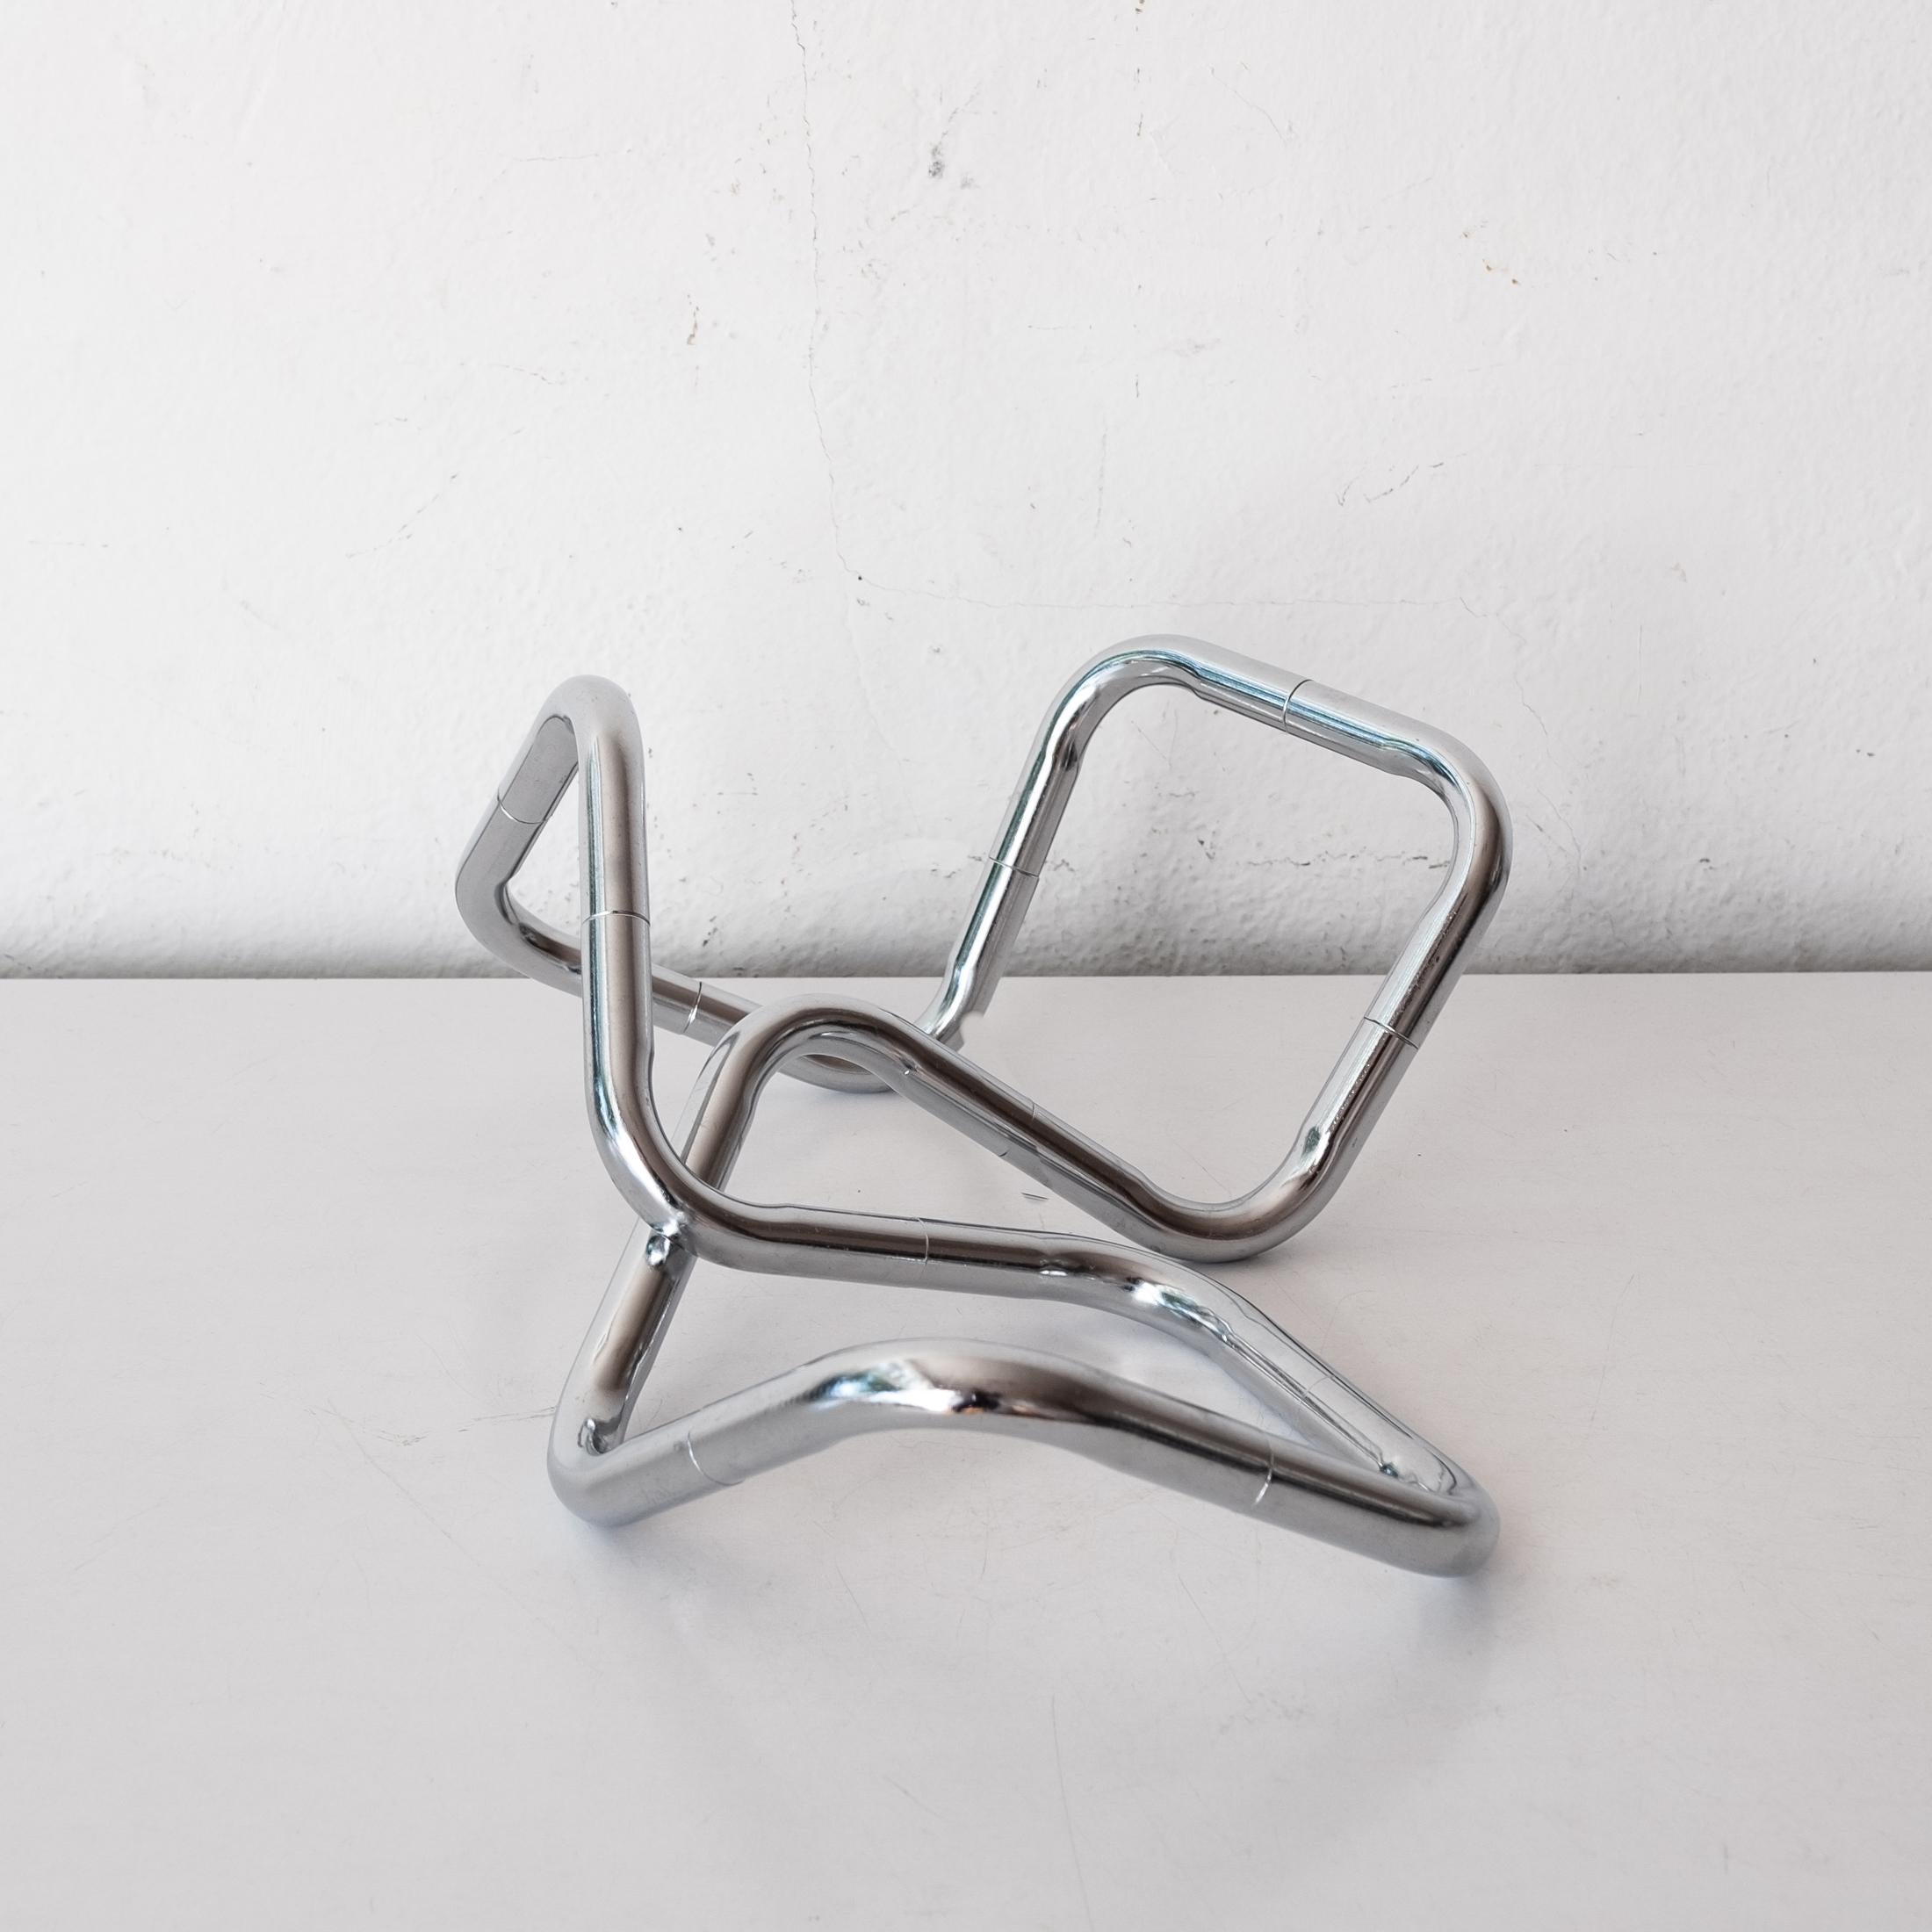 Modernist Metal Tangle Abstract Kinetic Sculpture 8